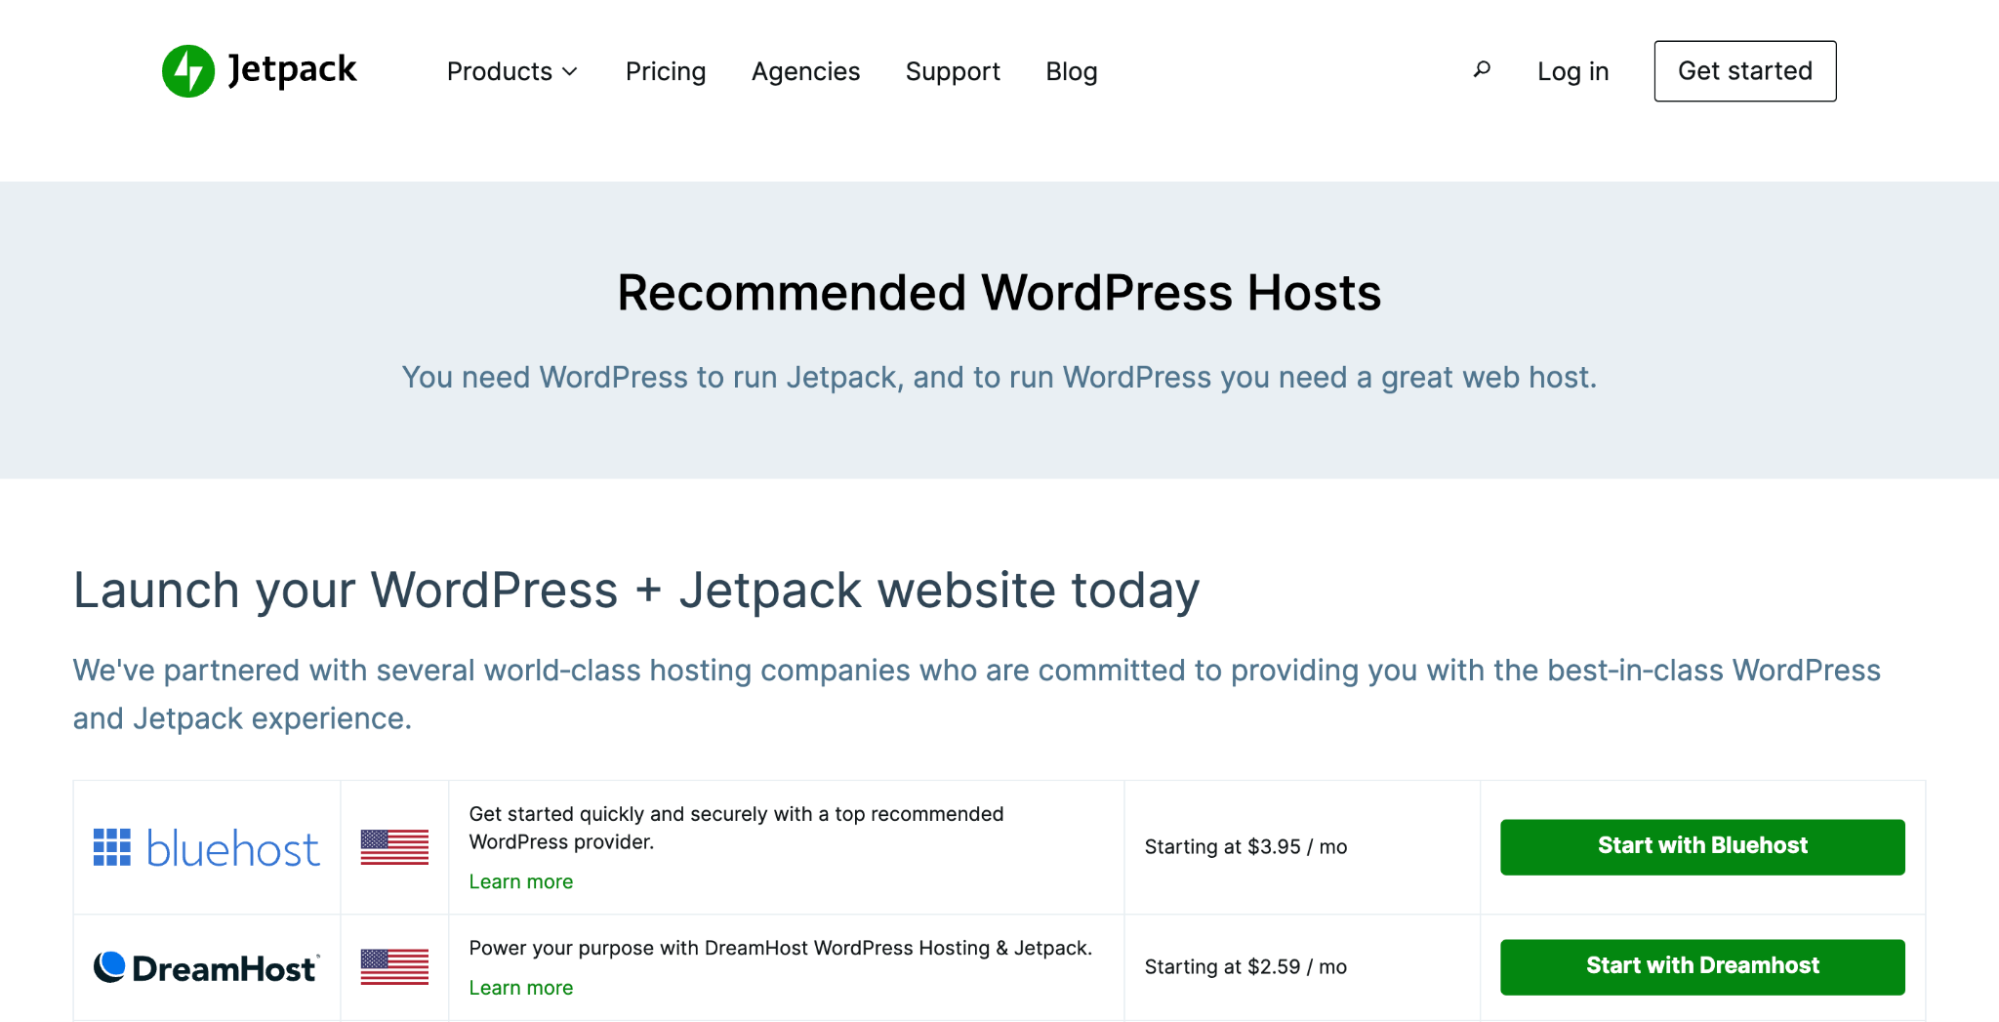 list of recommended hosts from Jetpack